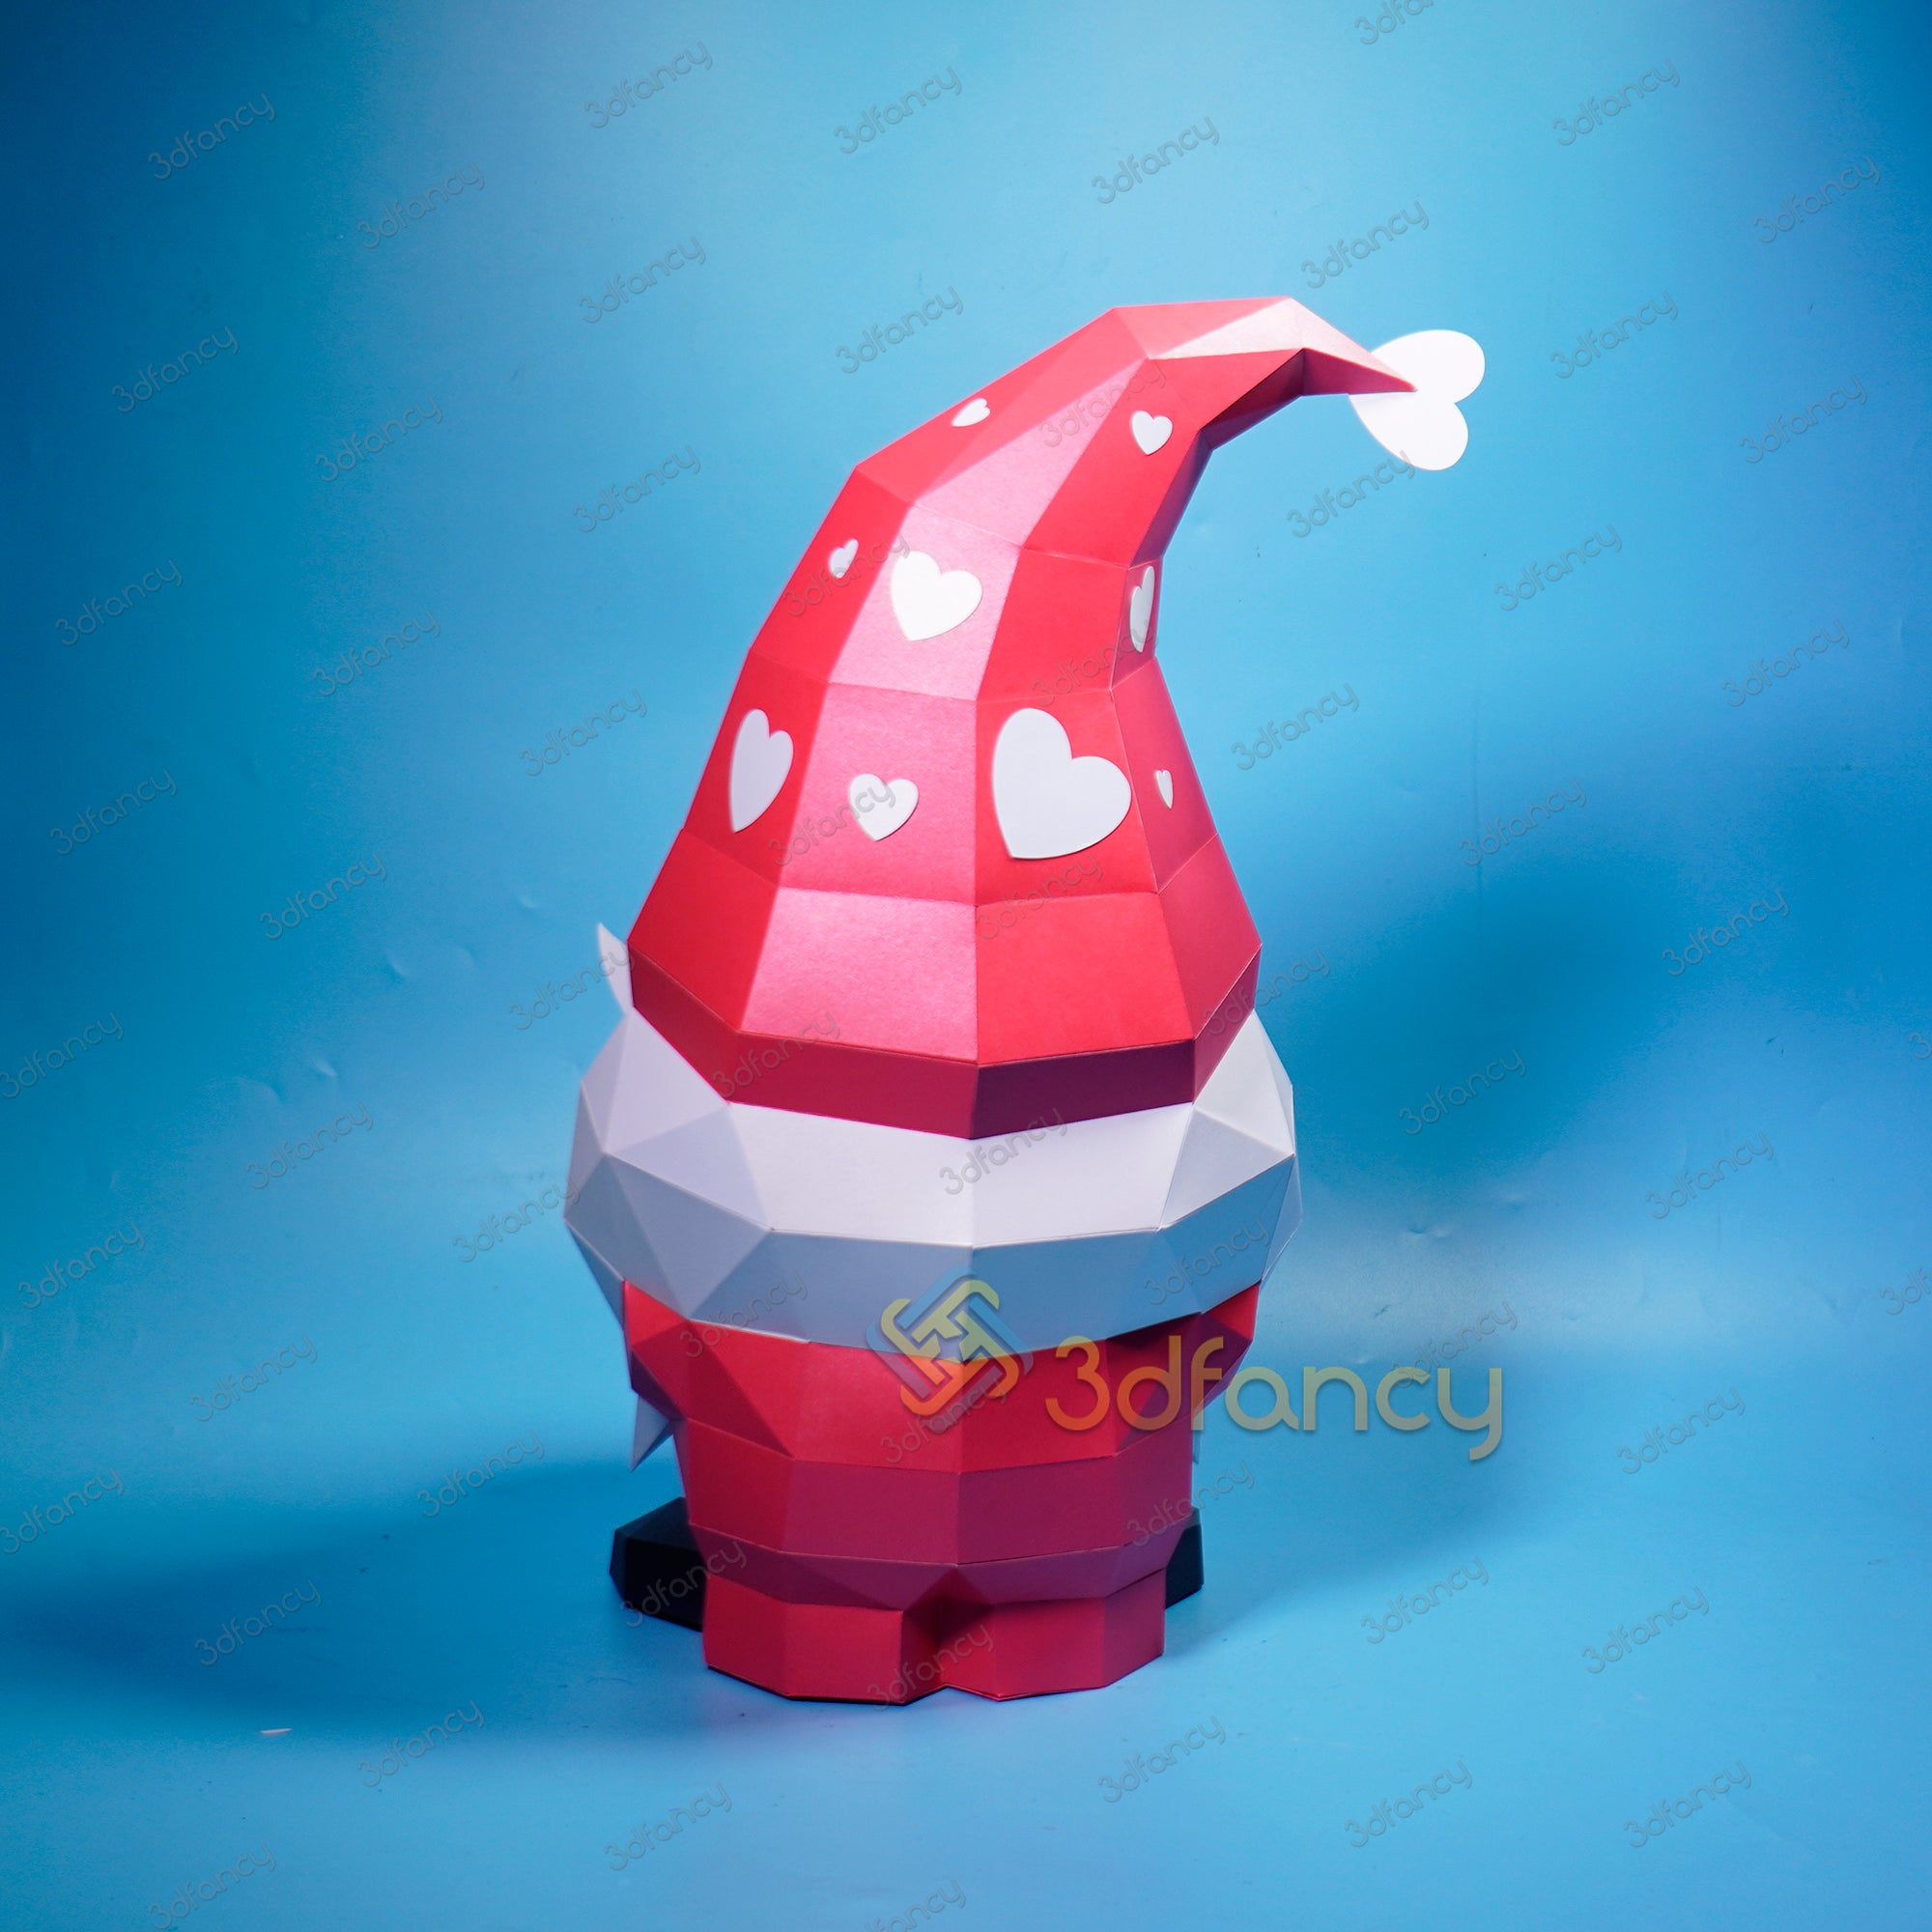 Valentines Gnome Papercraft PDF for Printer, SVG for Cricut Projects - DIY Low Poly Gnome Sculpture for Valentines Day vs Heart Paper Craft